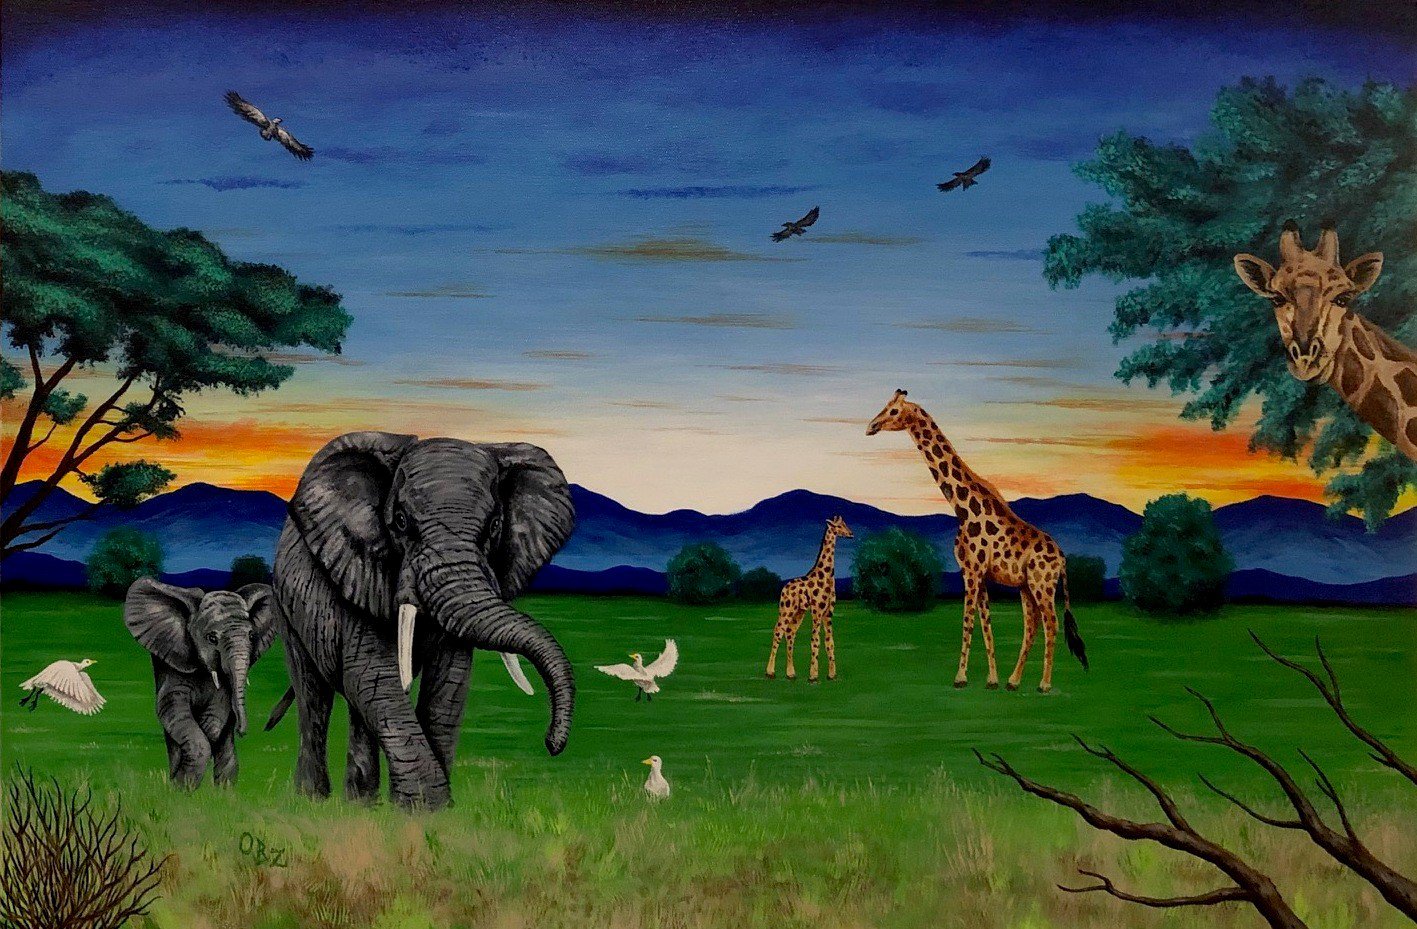 "African Sunset" African Safari with Elephants and Giraffes Art Poster Print by Gregg's Deep Colors